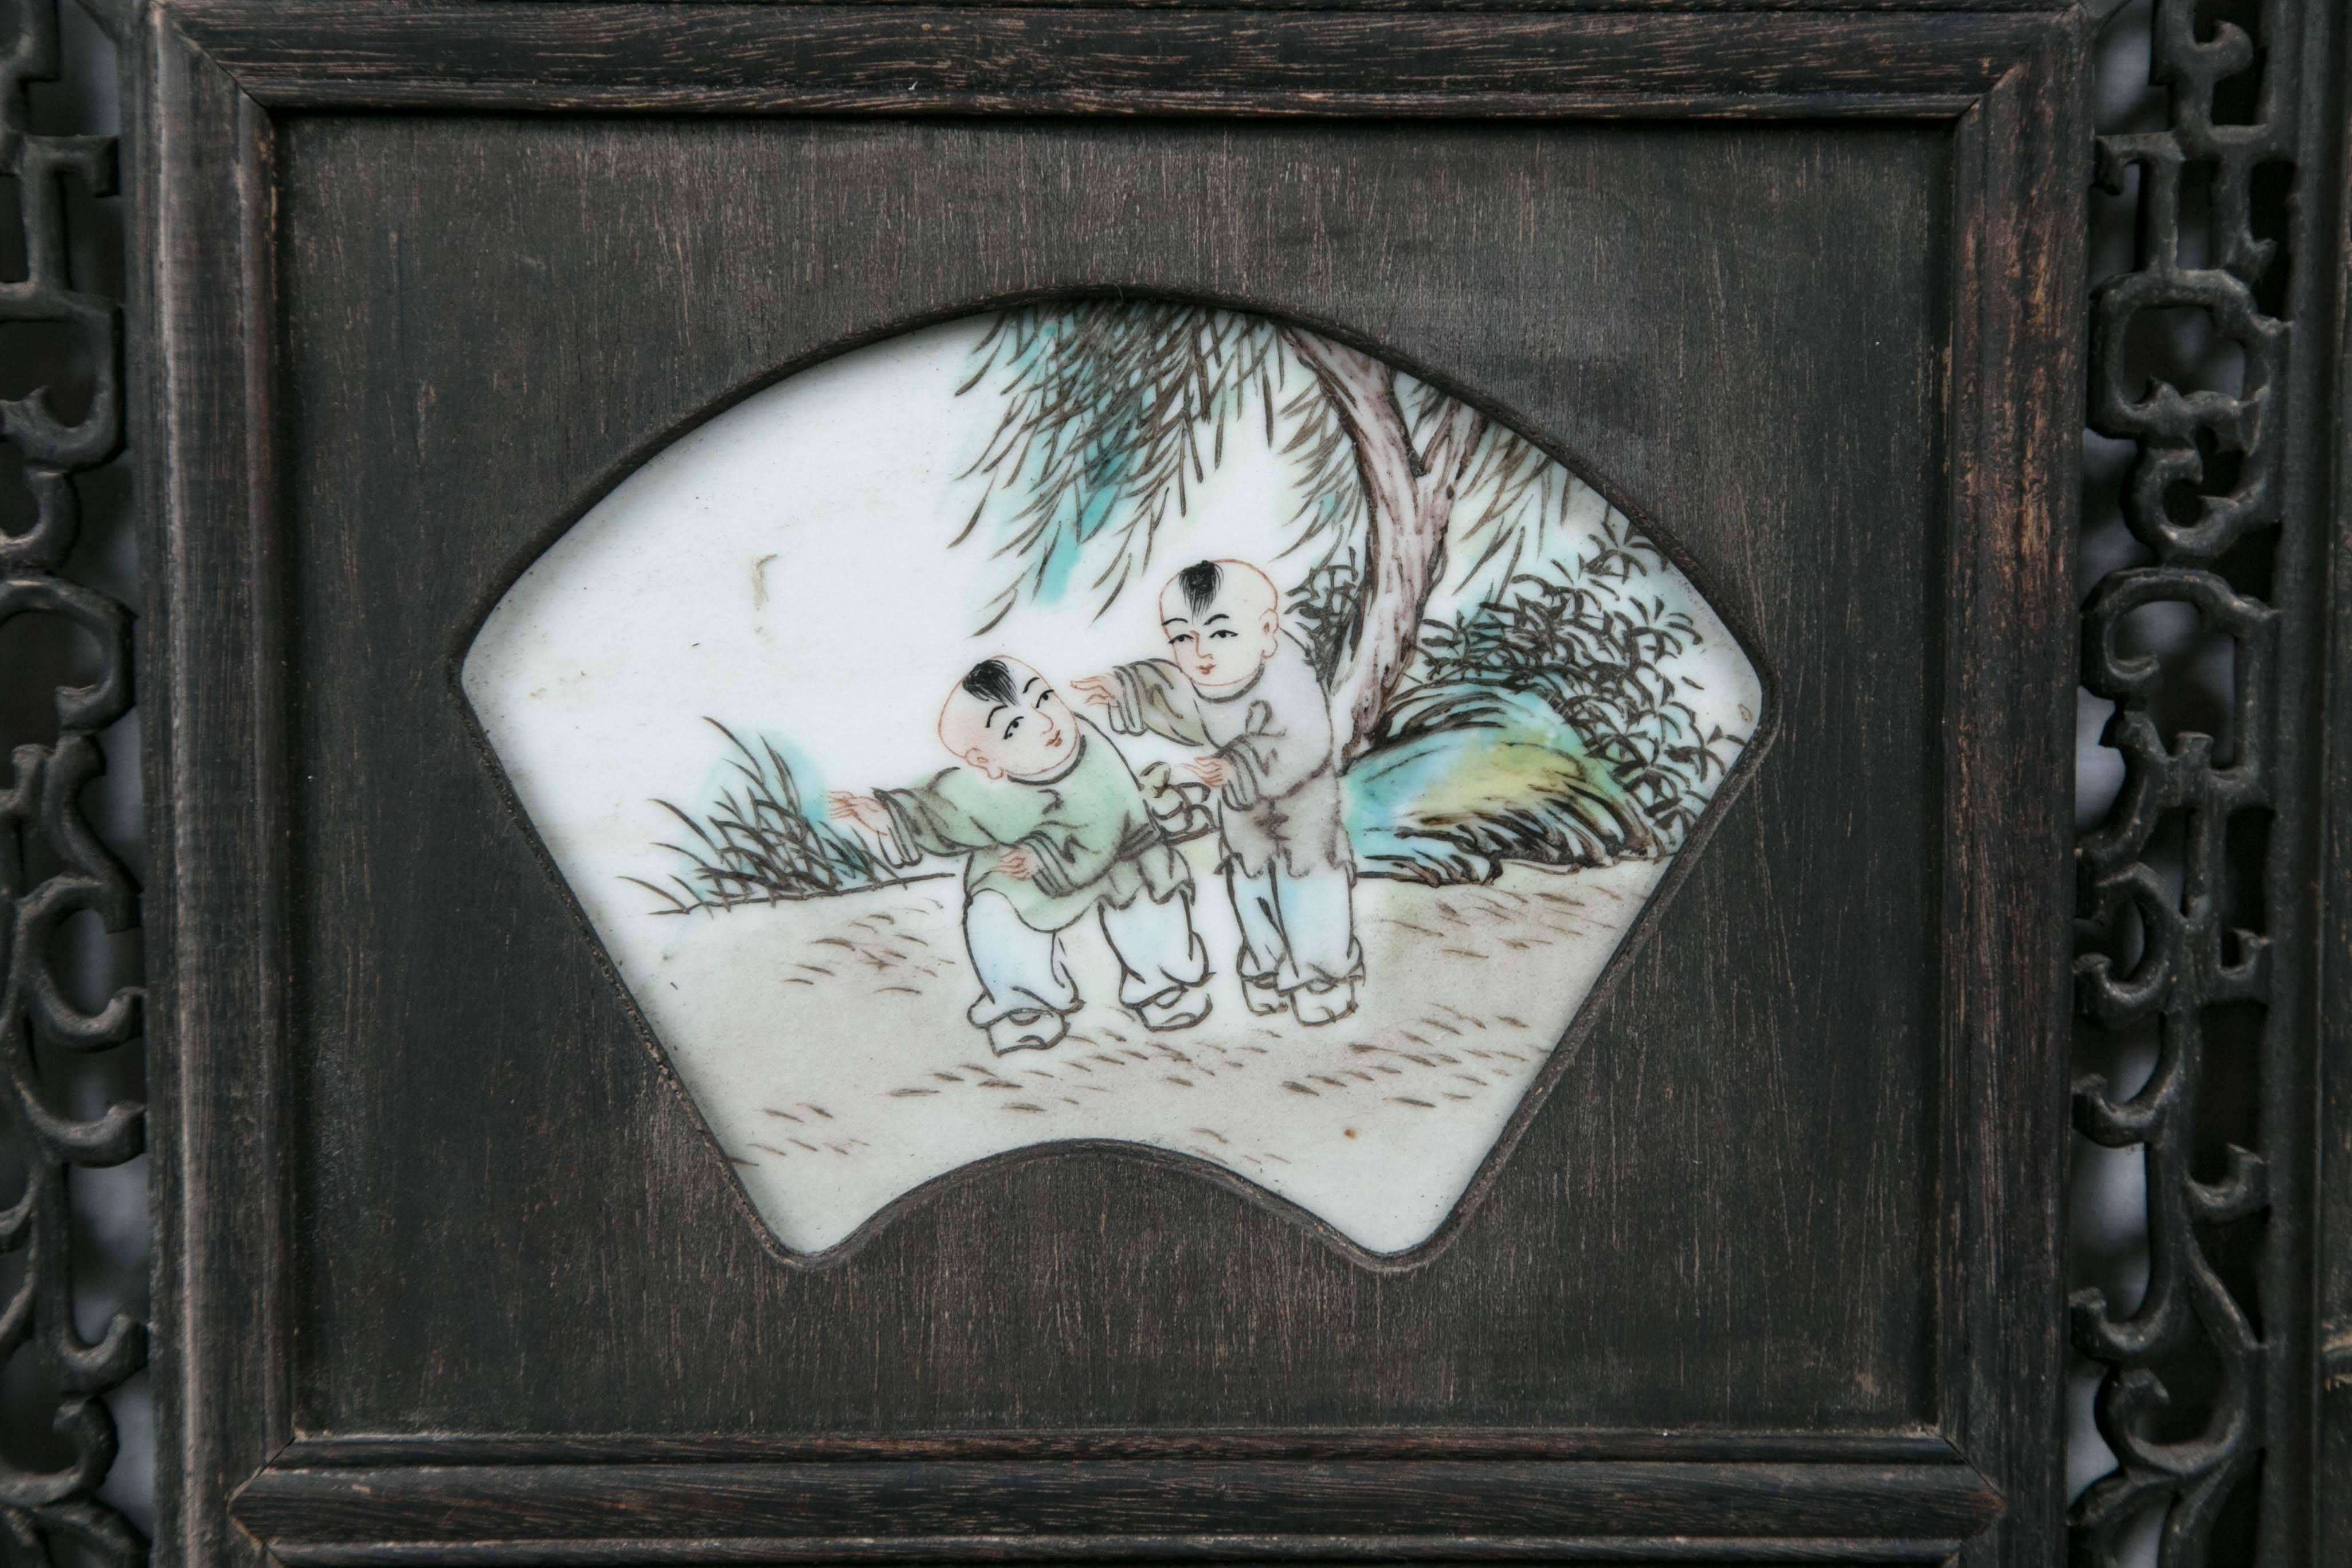 Set into a hardwood panel with open fret work and carvings. Hand-painted porcelains plaques of:
From the top: Boys at play, a beggar, a man and boy with a toy (?)

              